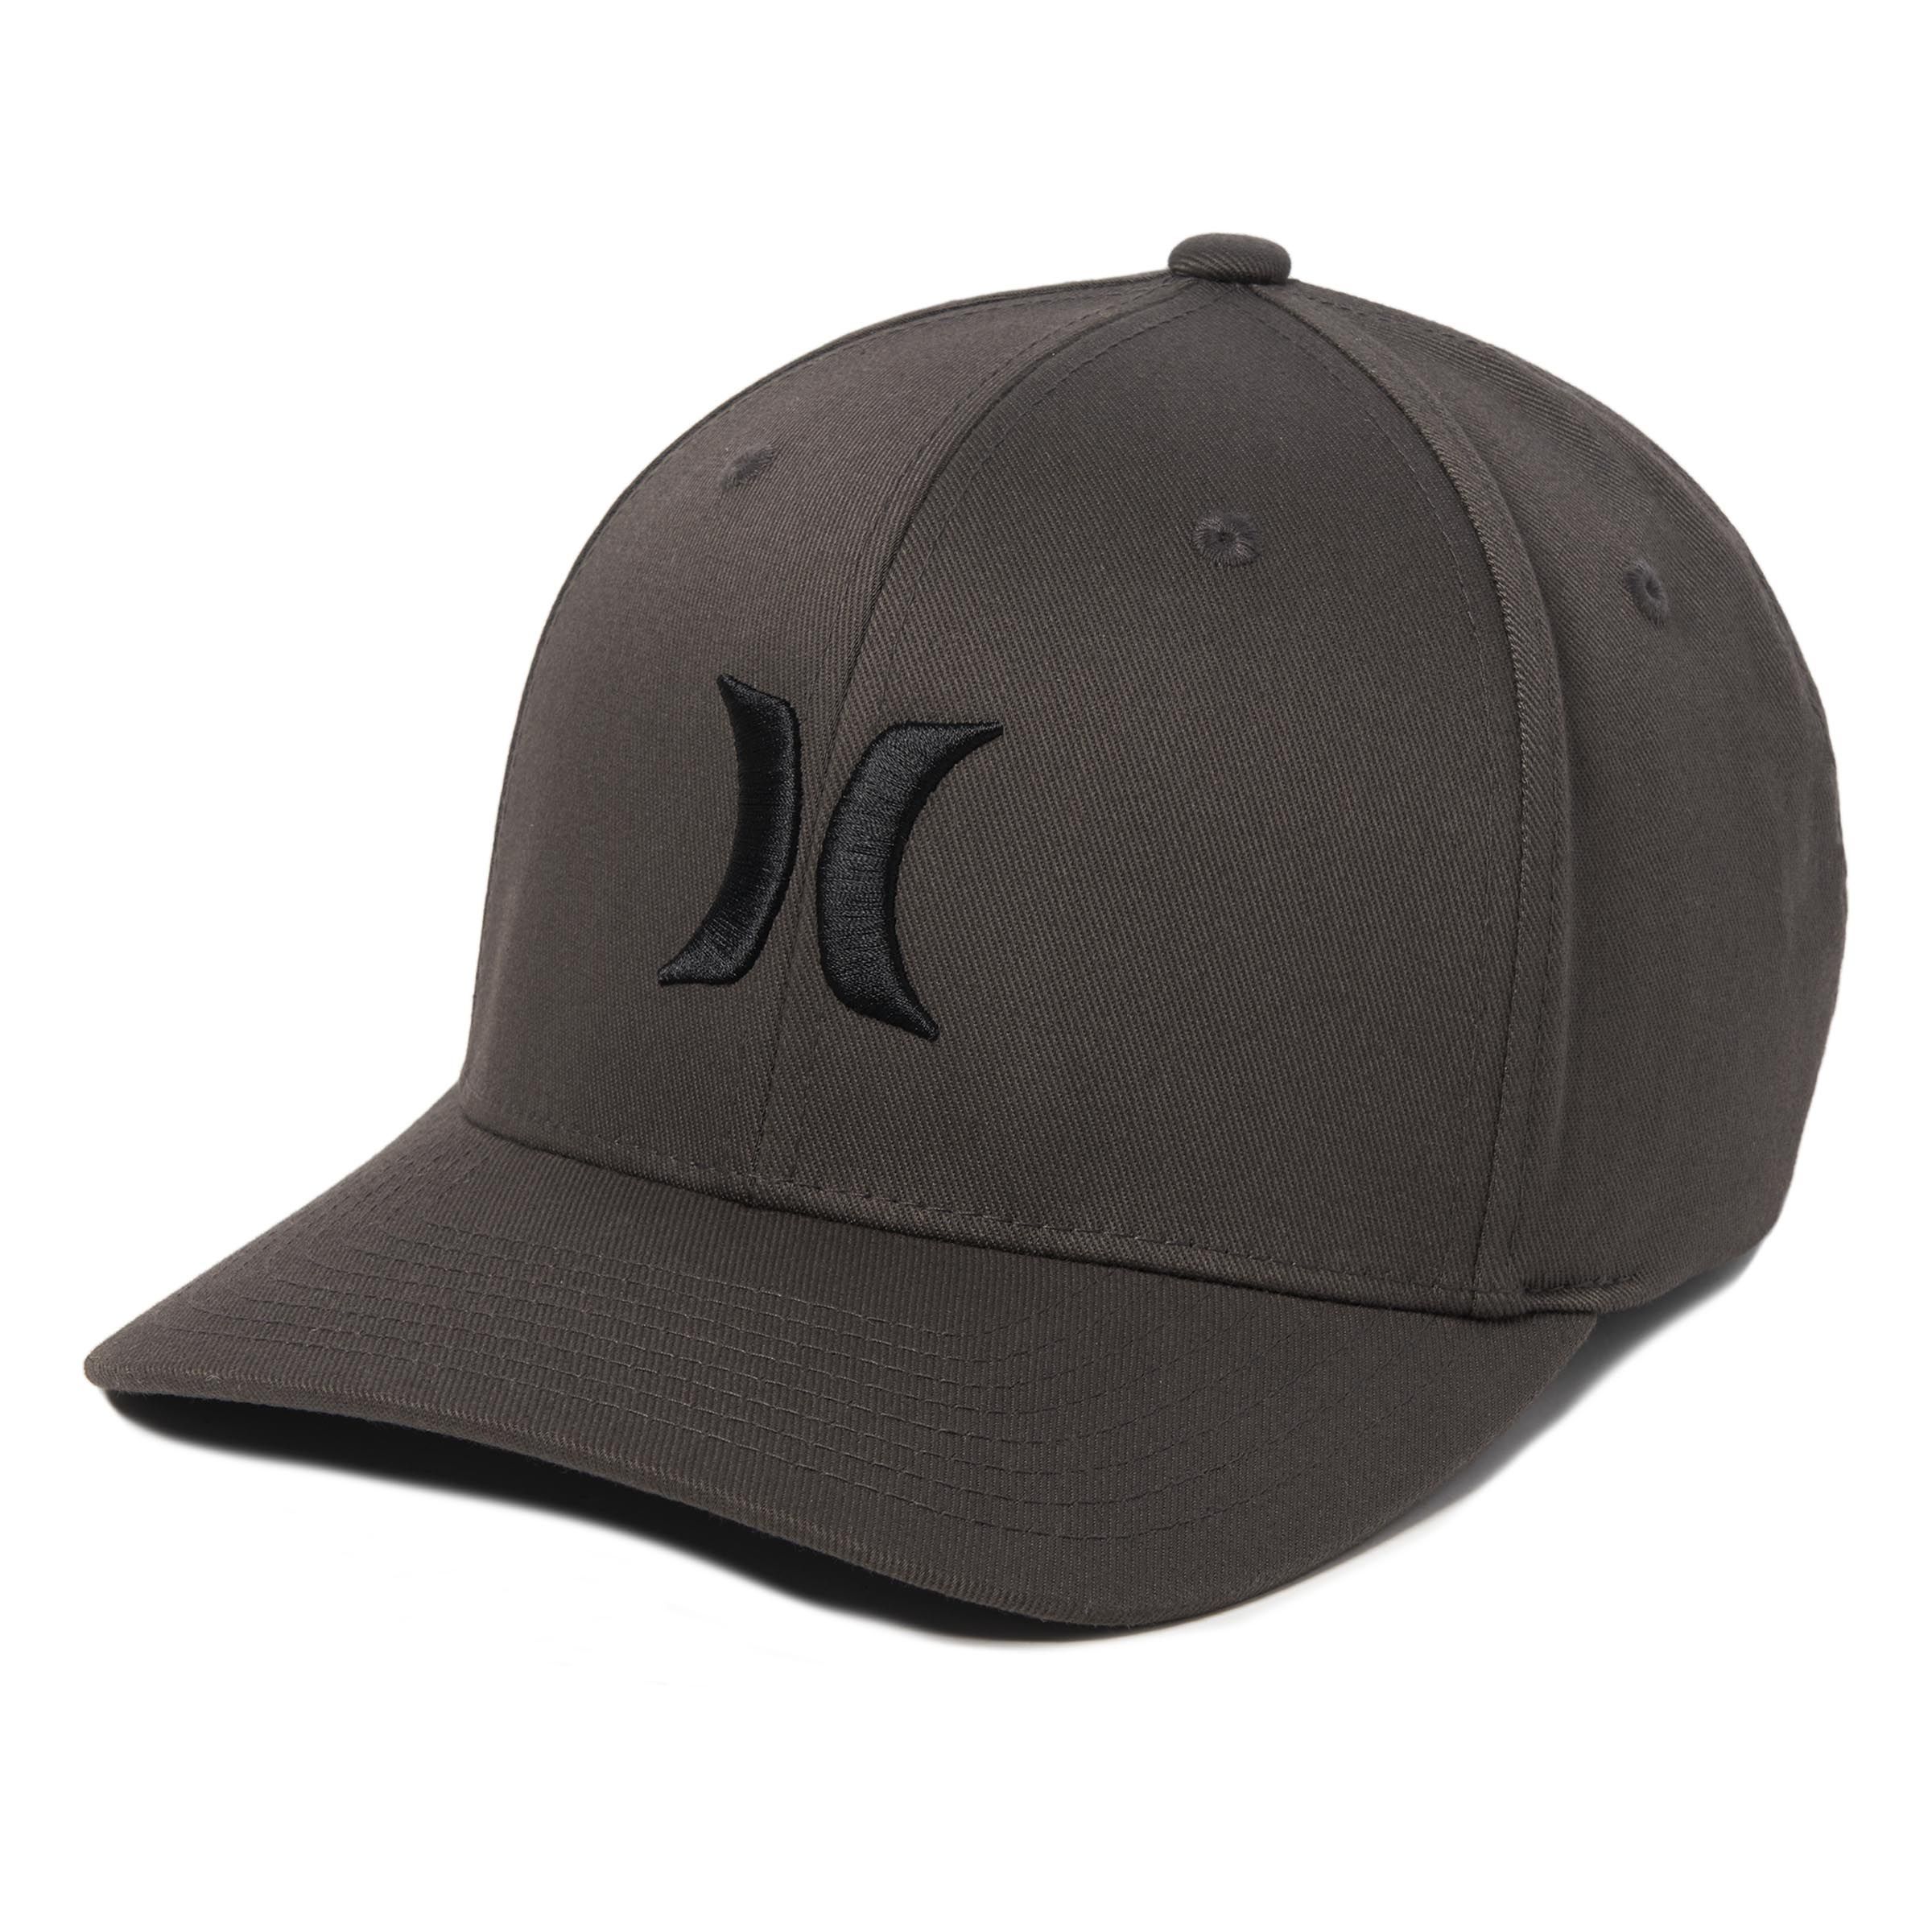 HURLEY-ONE-AND-ONLY-HAT-Flexfit-Cap-dark-grey